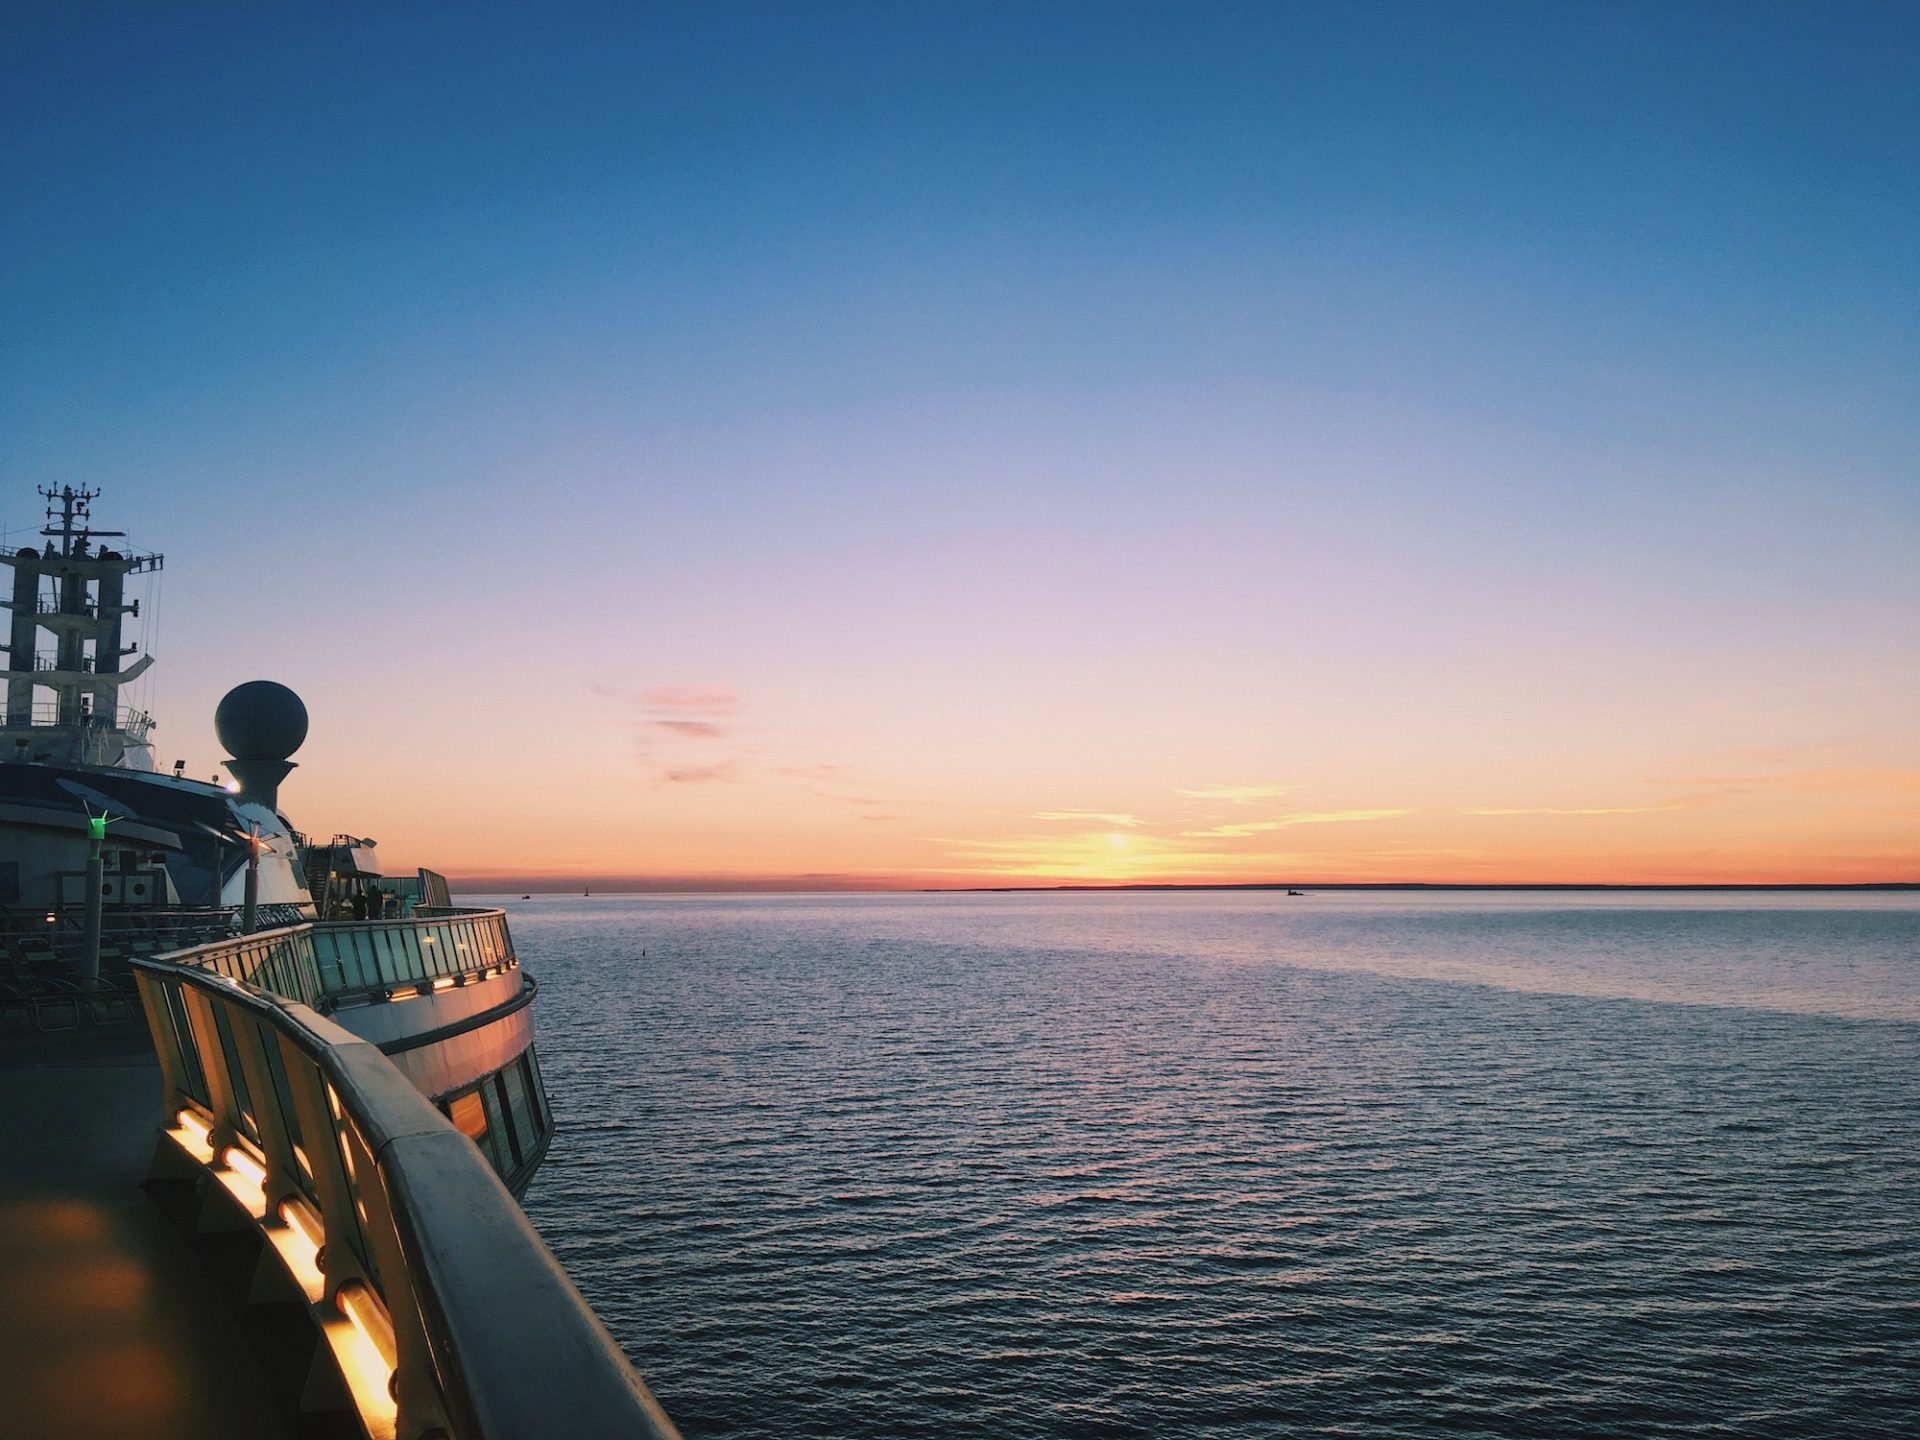 Top deck of cruise ship at sea during sunset